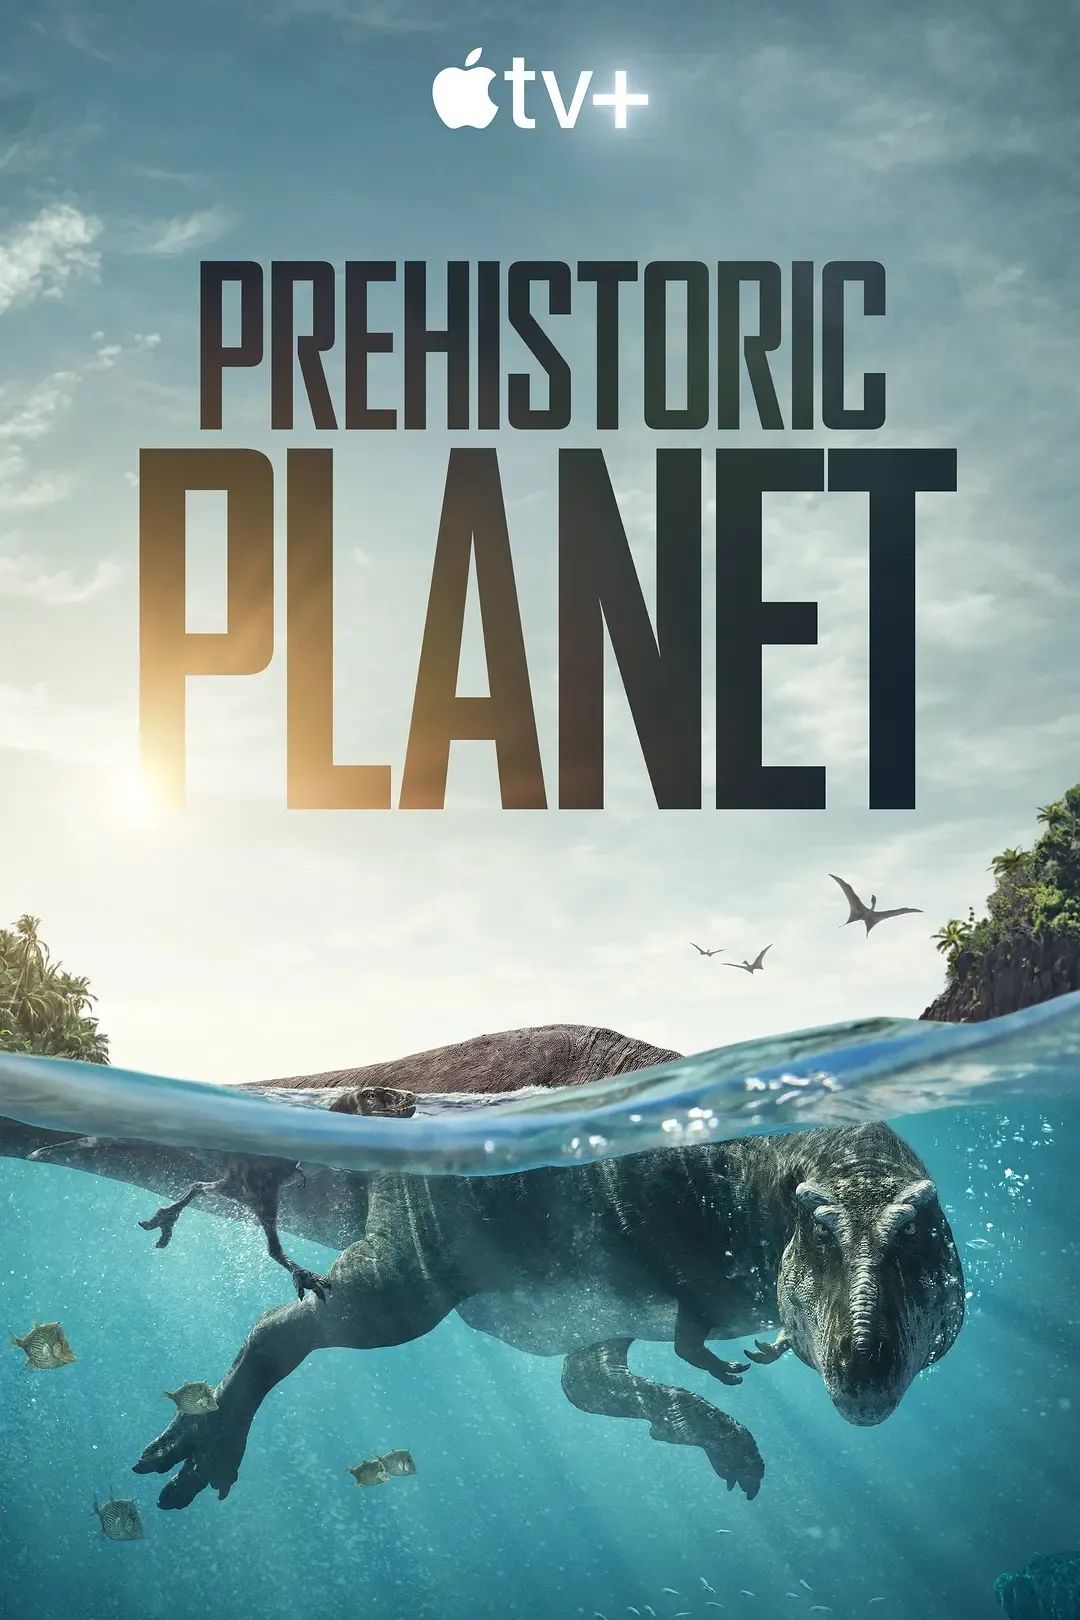 The Prehistoric Planet poster